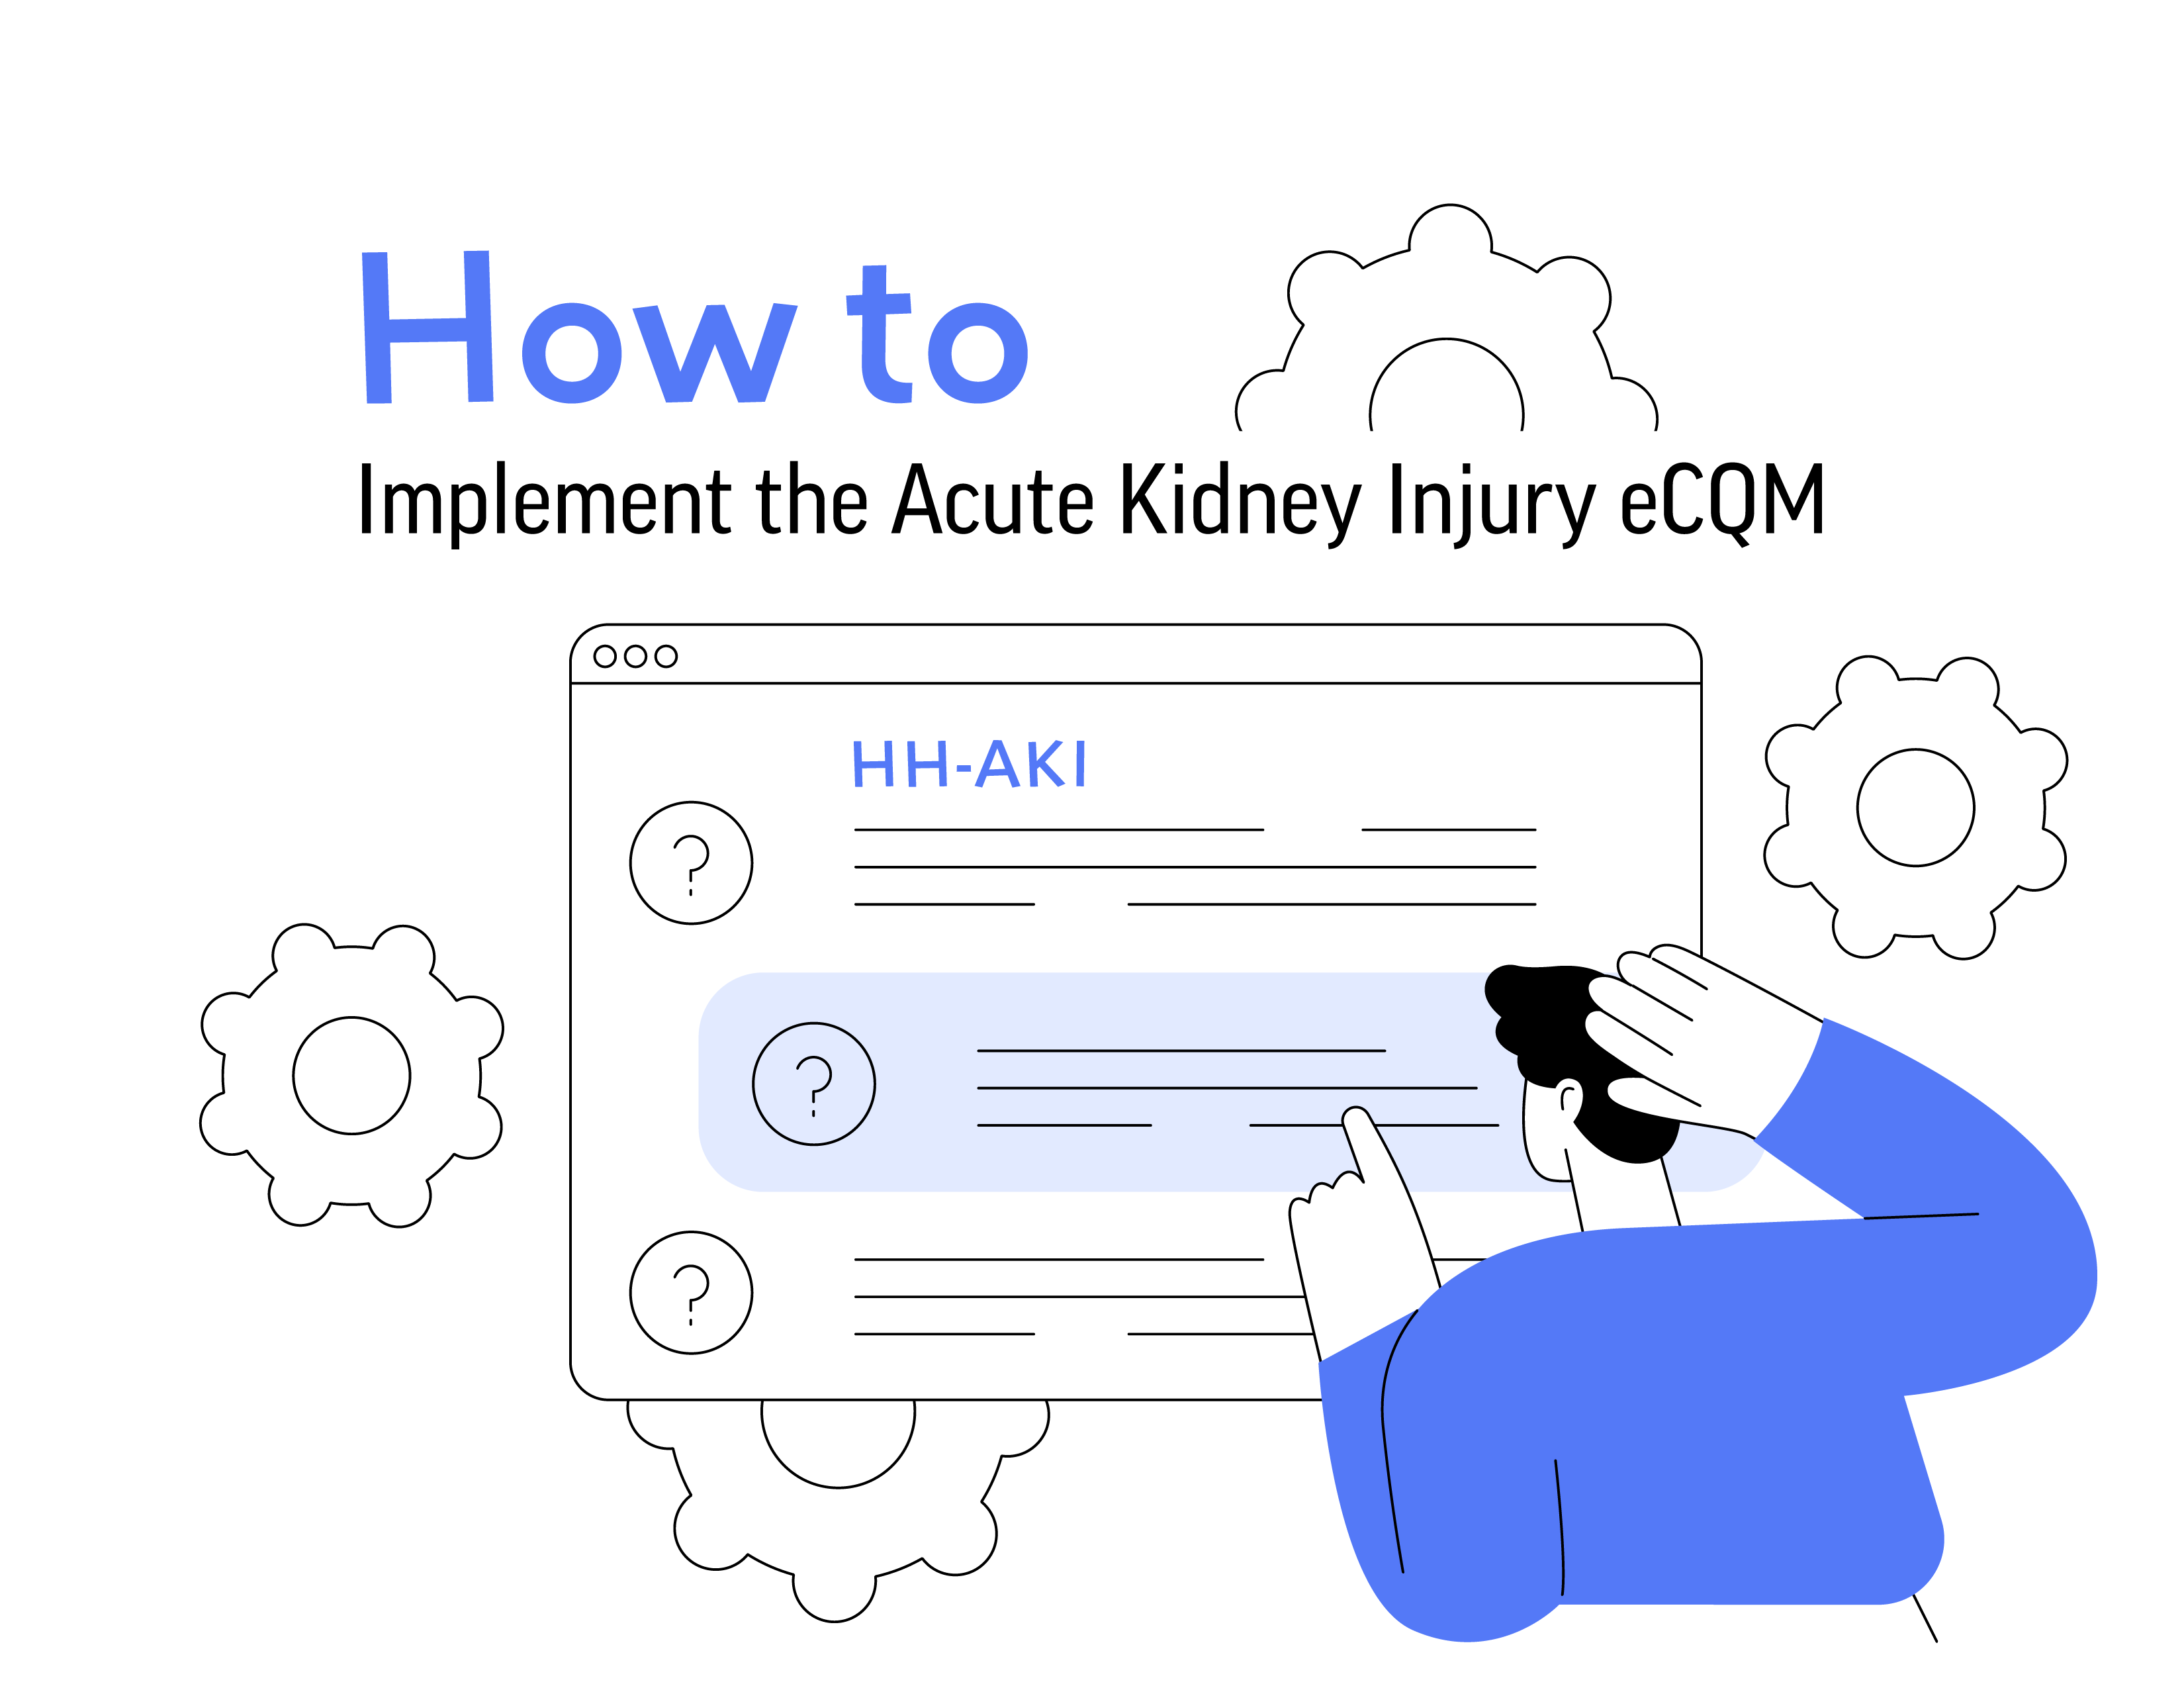 How to Implement the Acute Kidney Injury eCQM